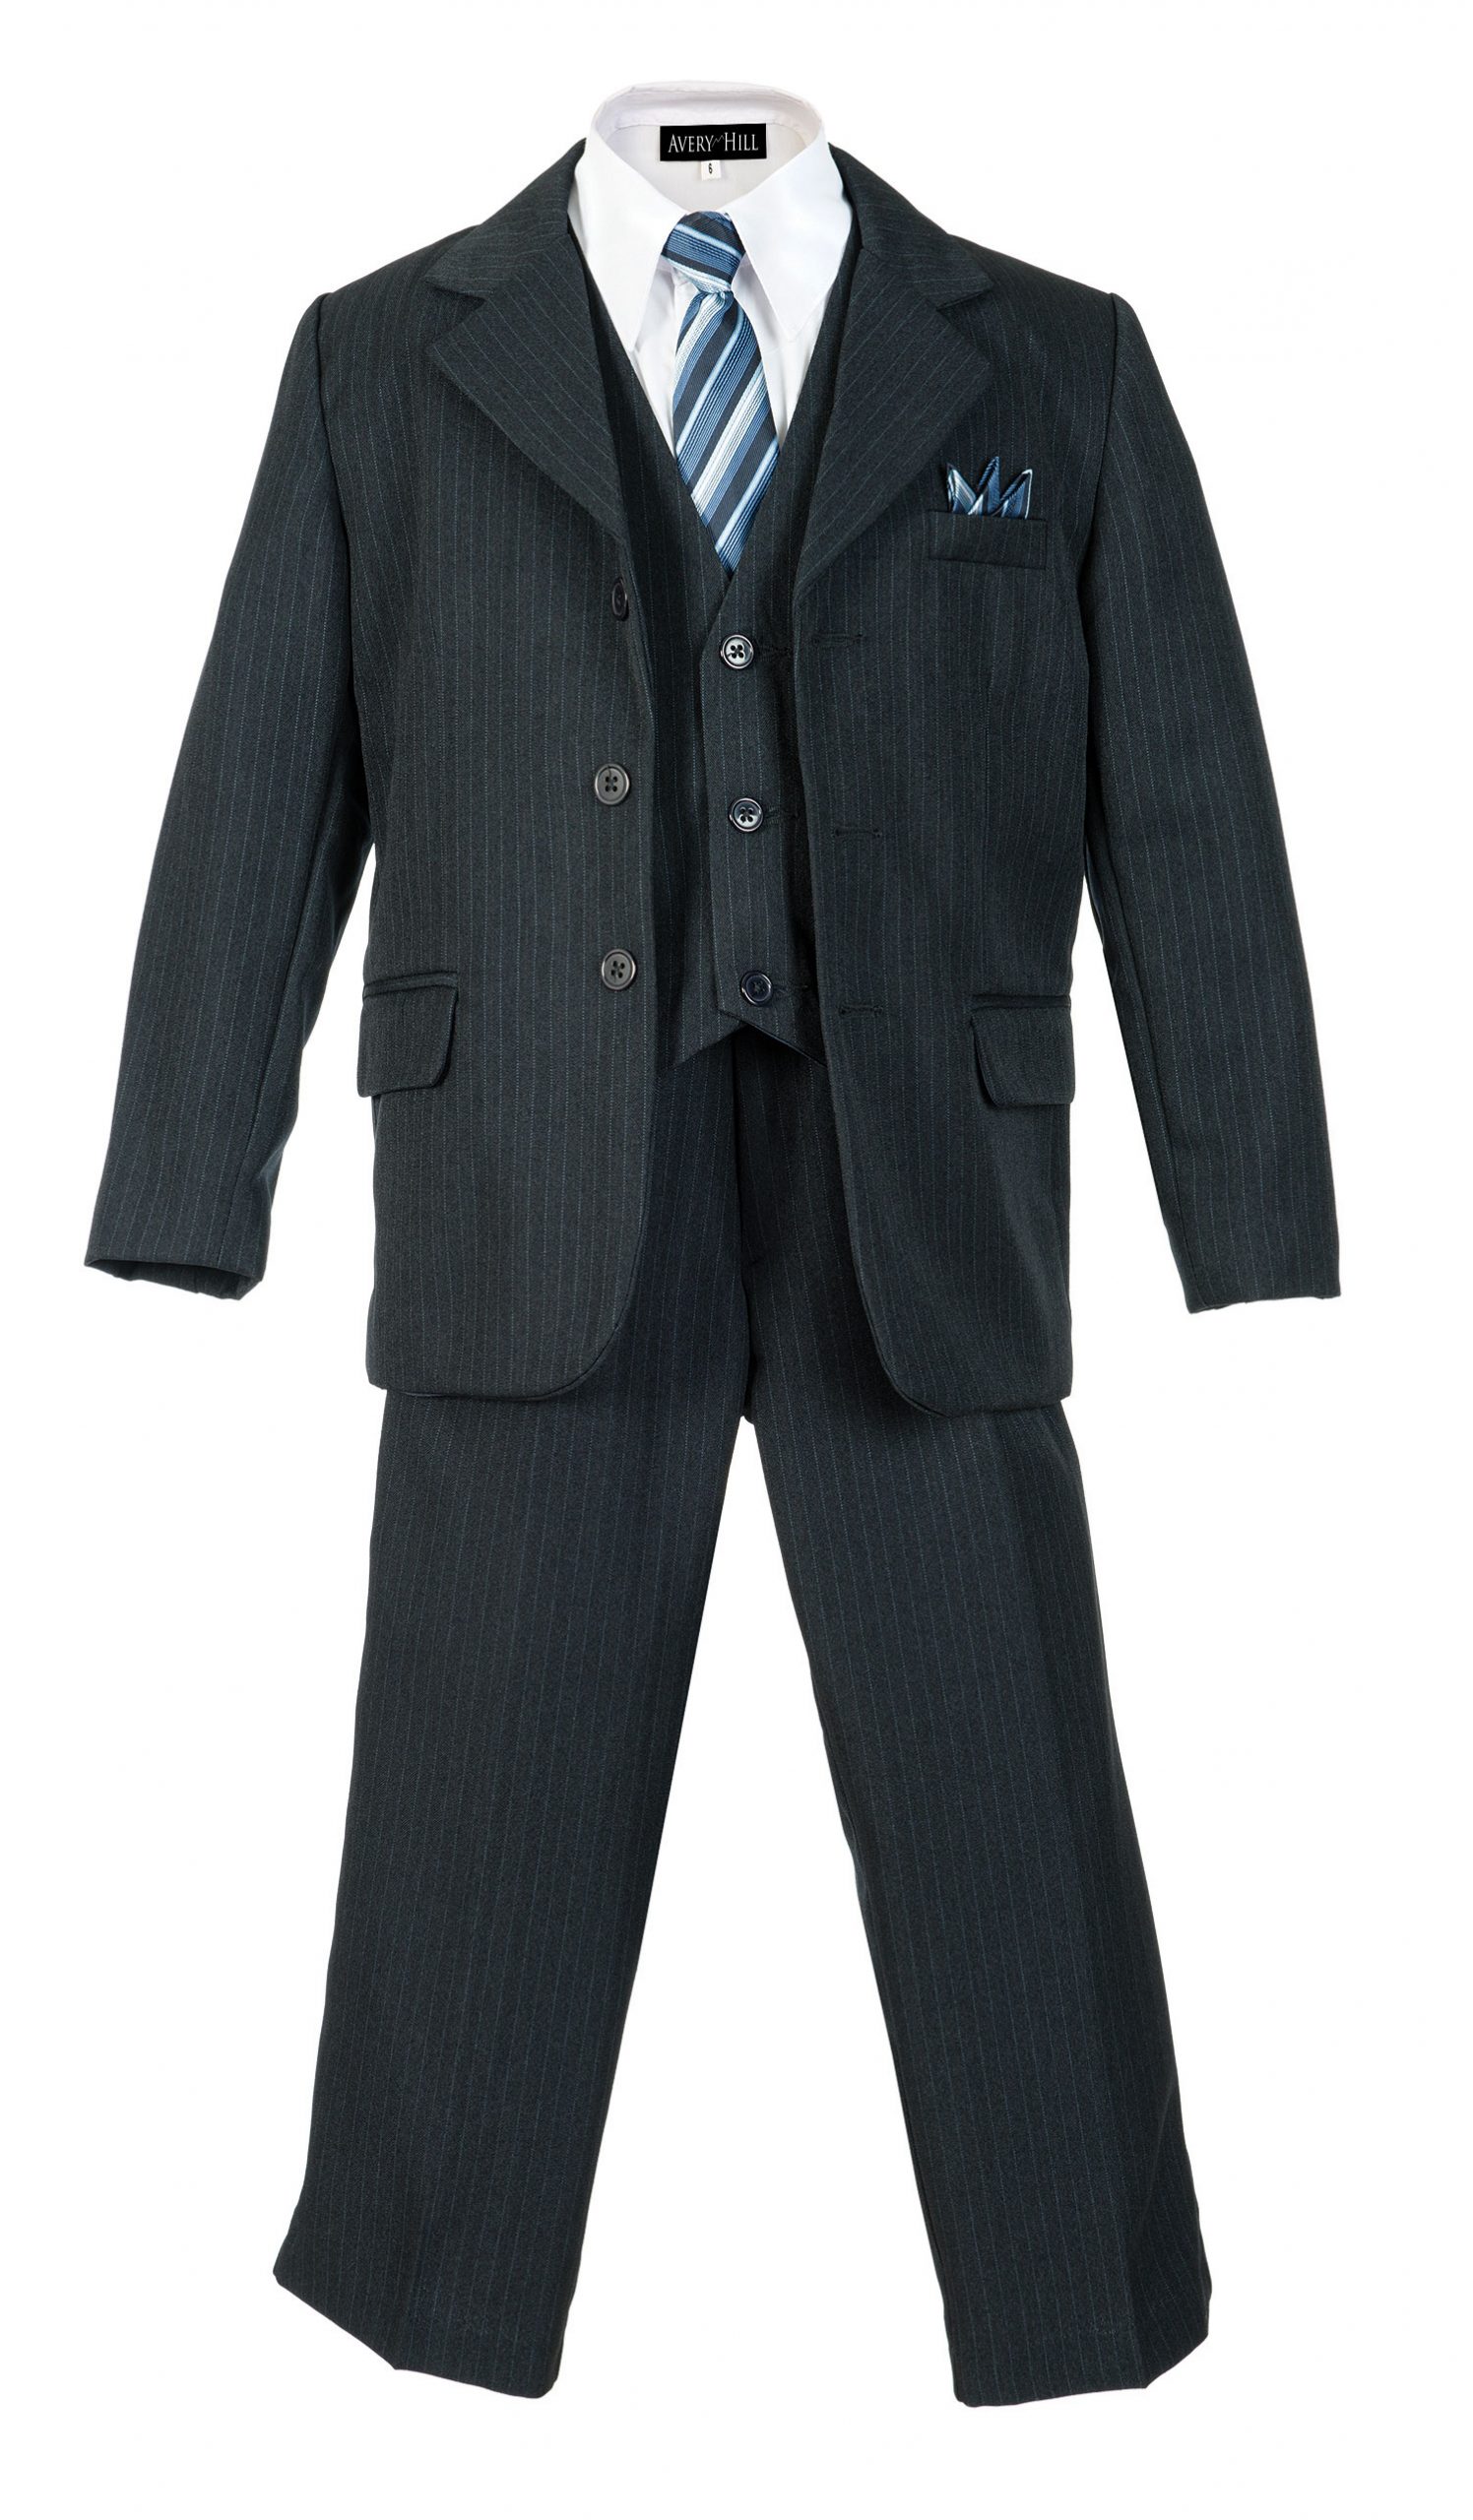 Boys Pinstripe Suit Set with Matching Tie NB 18